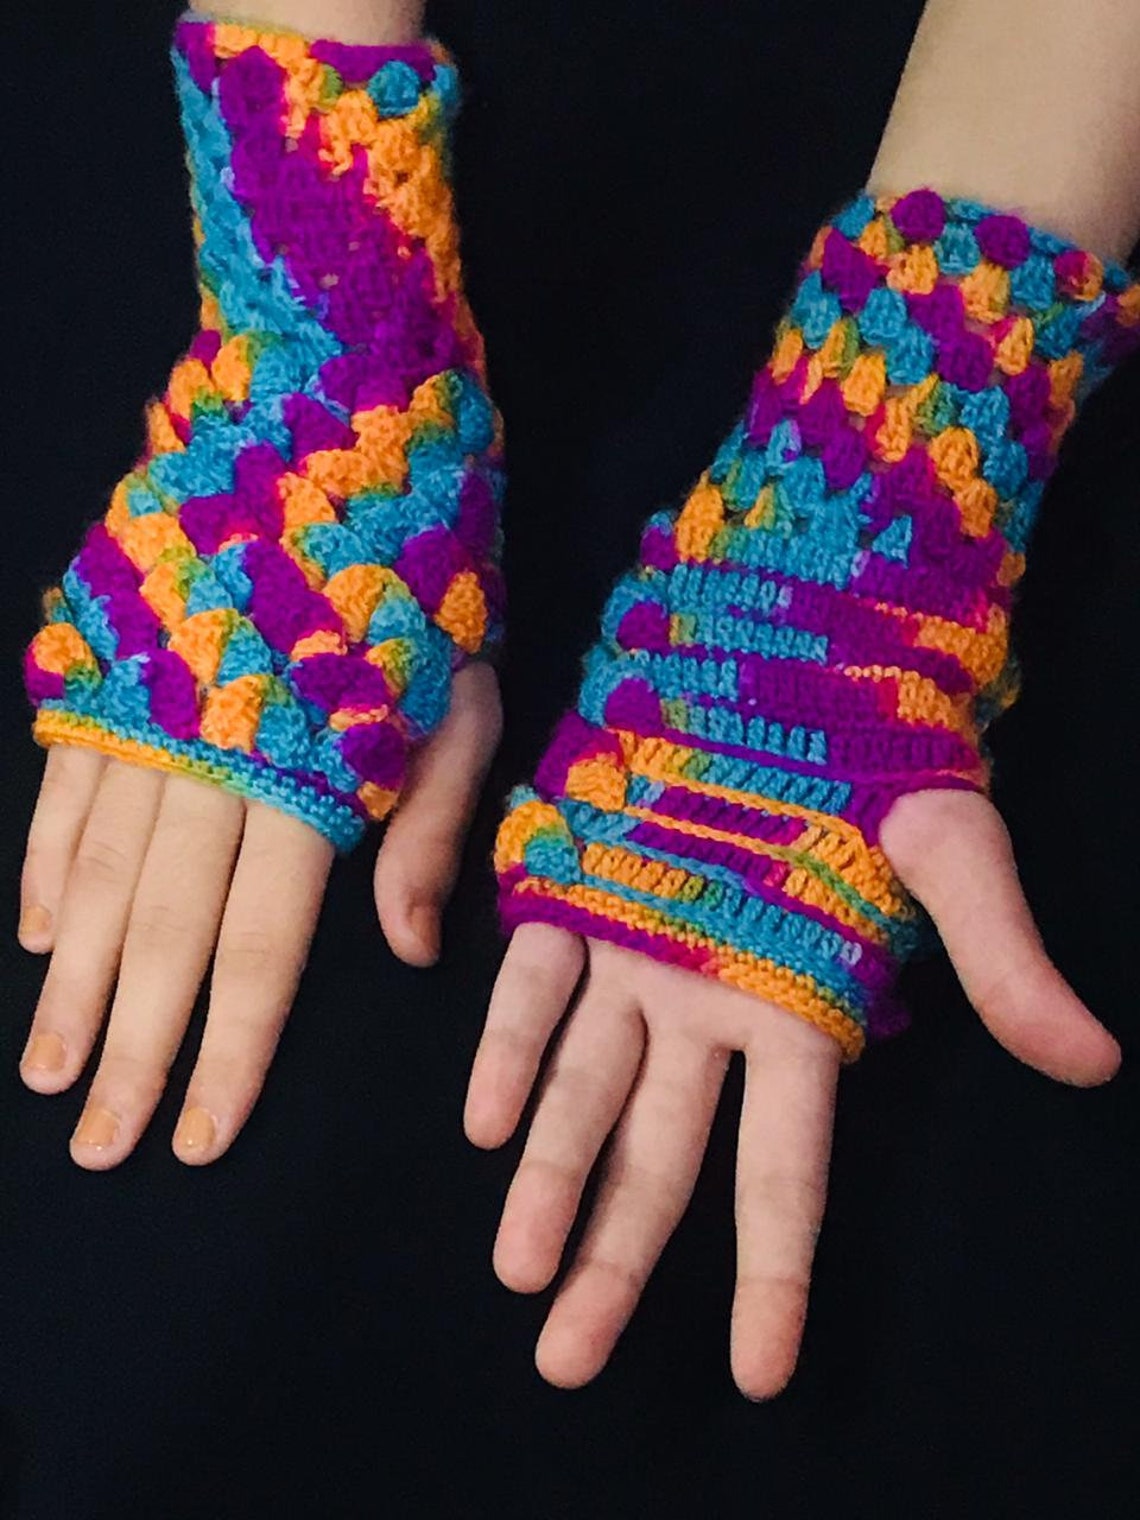 Pure Handmade knitted / Crochet Gauntlets Lady Fashion Fingerless Gloves / Mitten Multi Colour